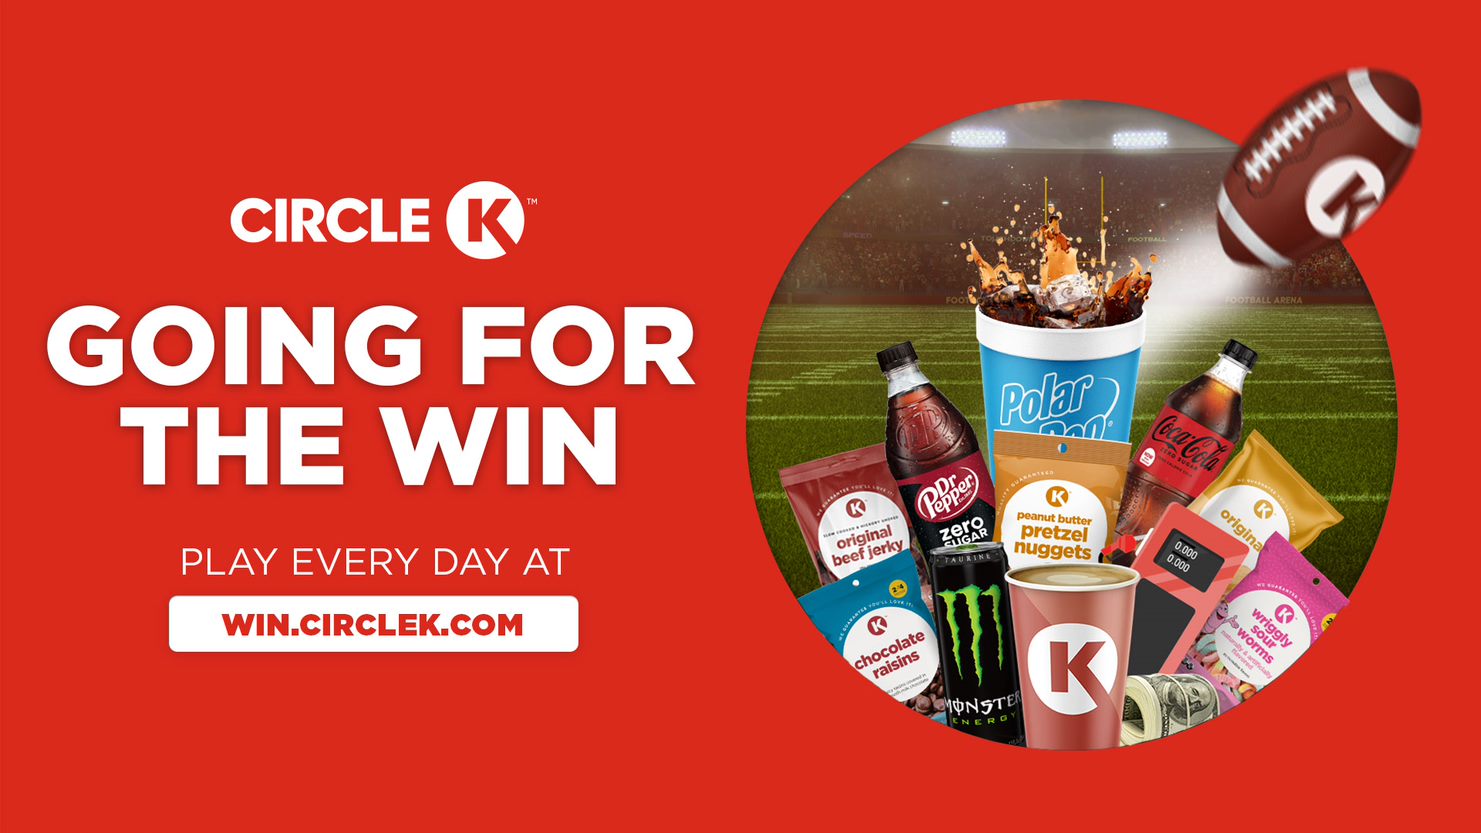 After the Game: Continuing the Circle K Journey